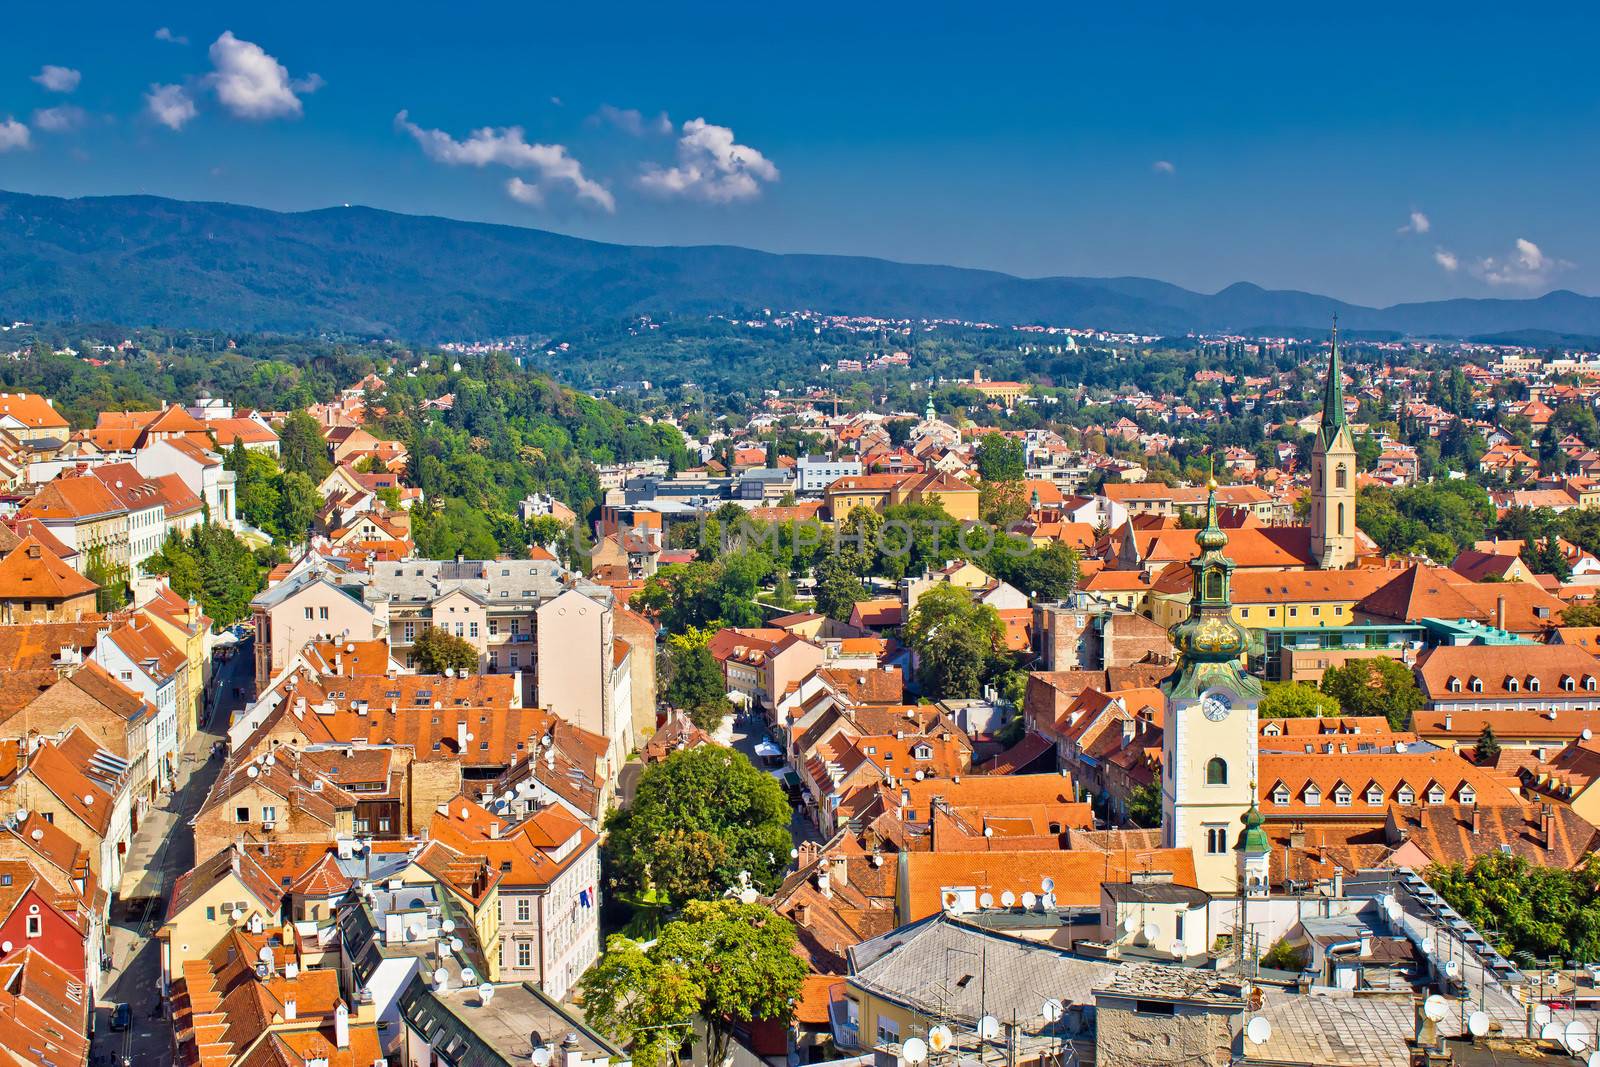 Zagreb, Capital of Croatia aerial view - colorful rooftops and church towers